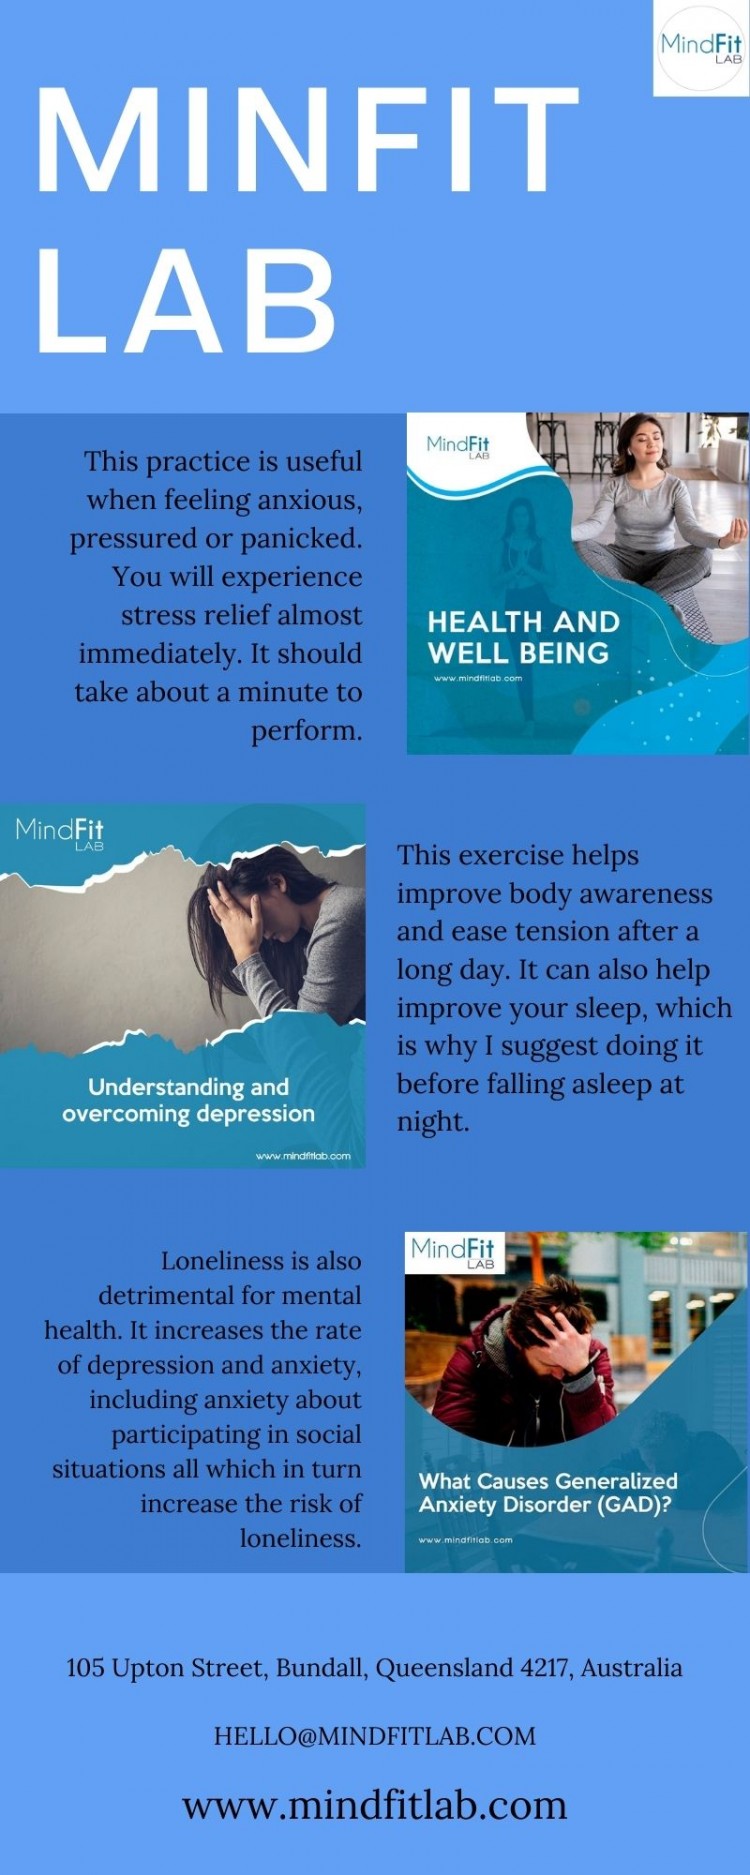 Improve your body and mental health with the mental wellbeing courses. Enhance the lifestyle and best results for the people coping with different issues such as low mood, stress, sleeplessness, and many more.
https://mindfitlab.com/